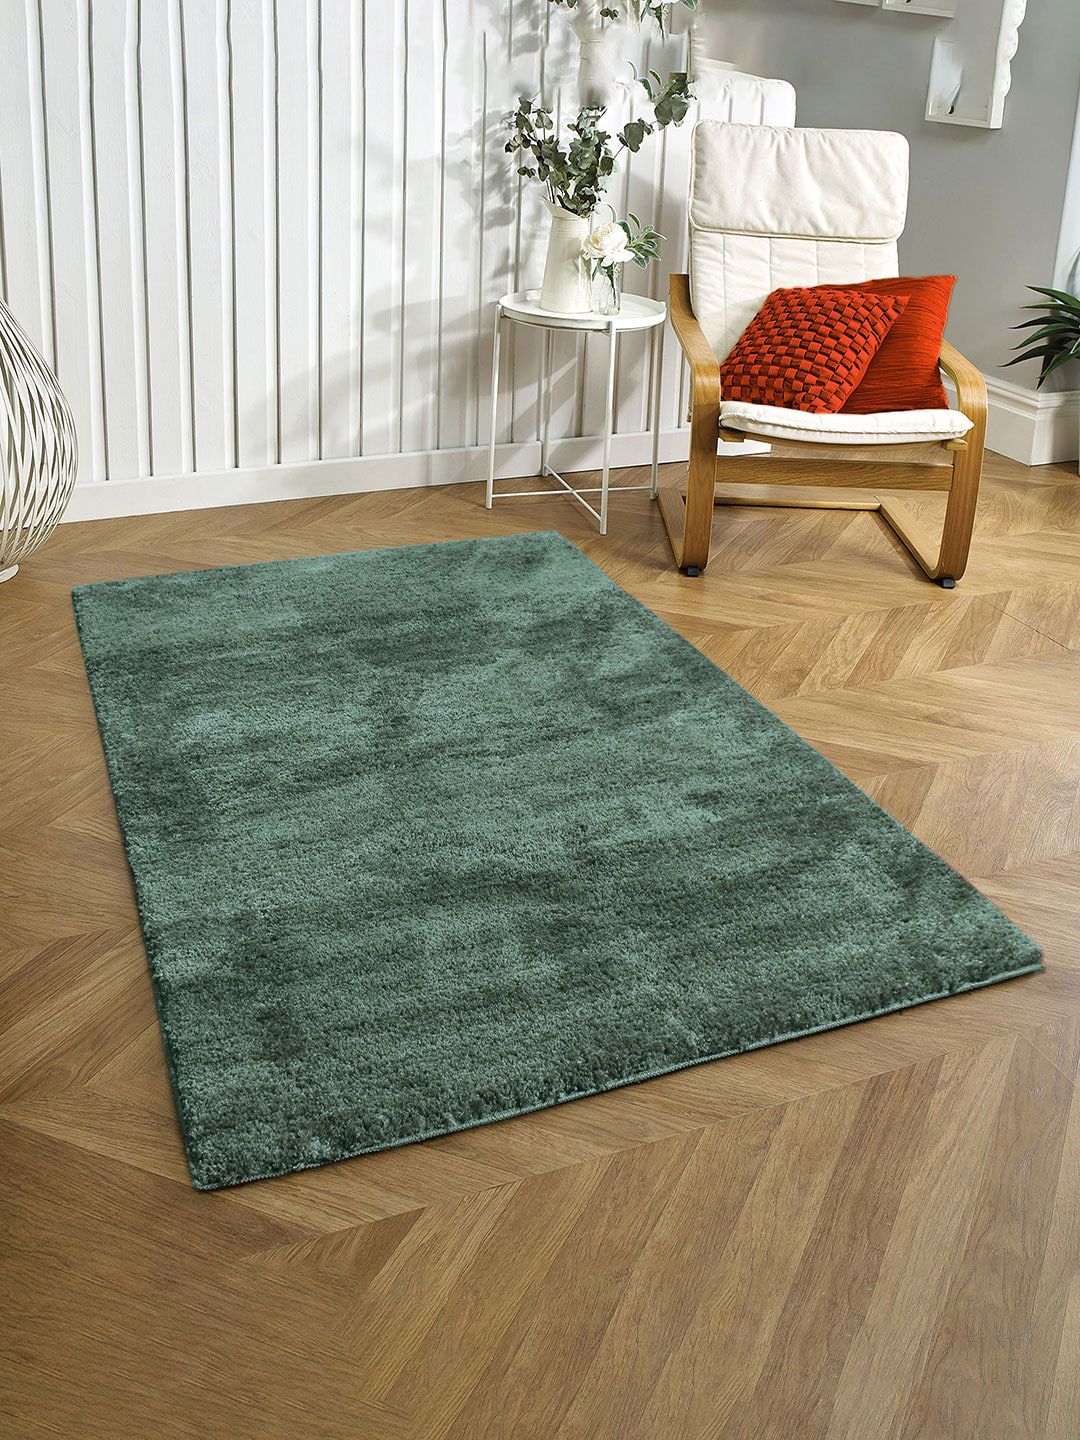 LUXEHOME INTERNATIONAL Green Solid Rectangular Anti-Skid Carpet Price in India